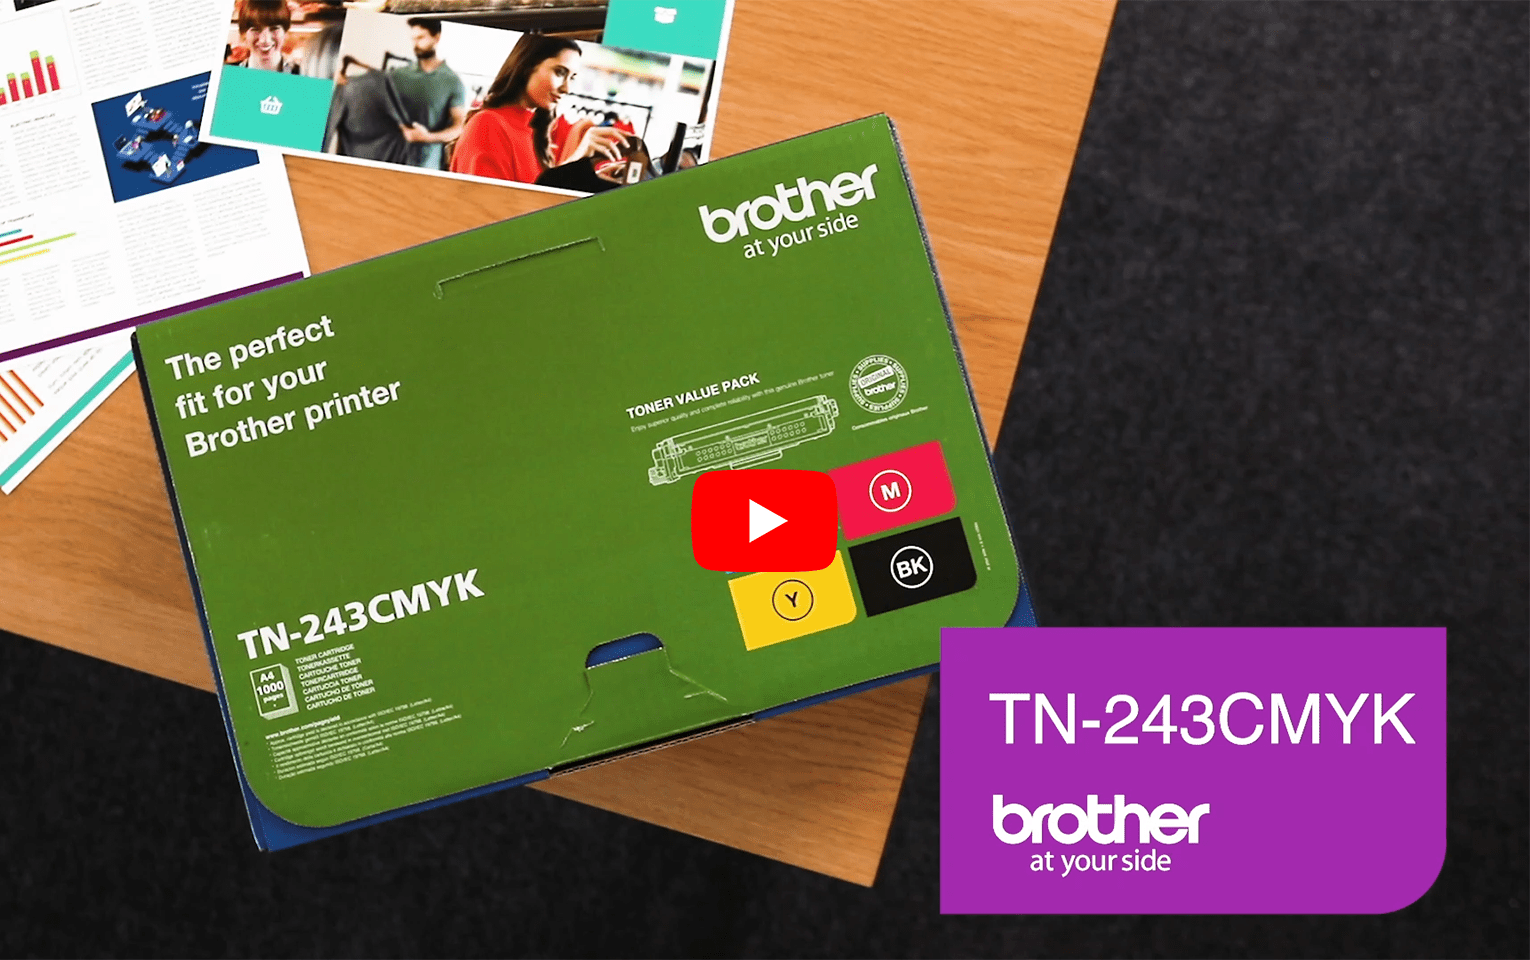 Brother TN-243CMYK Value Pack 5